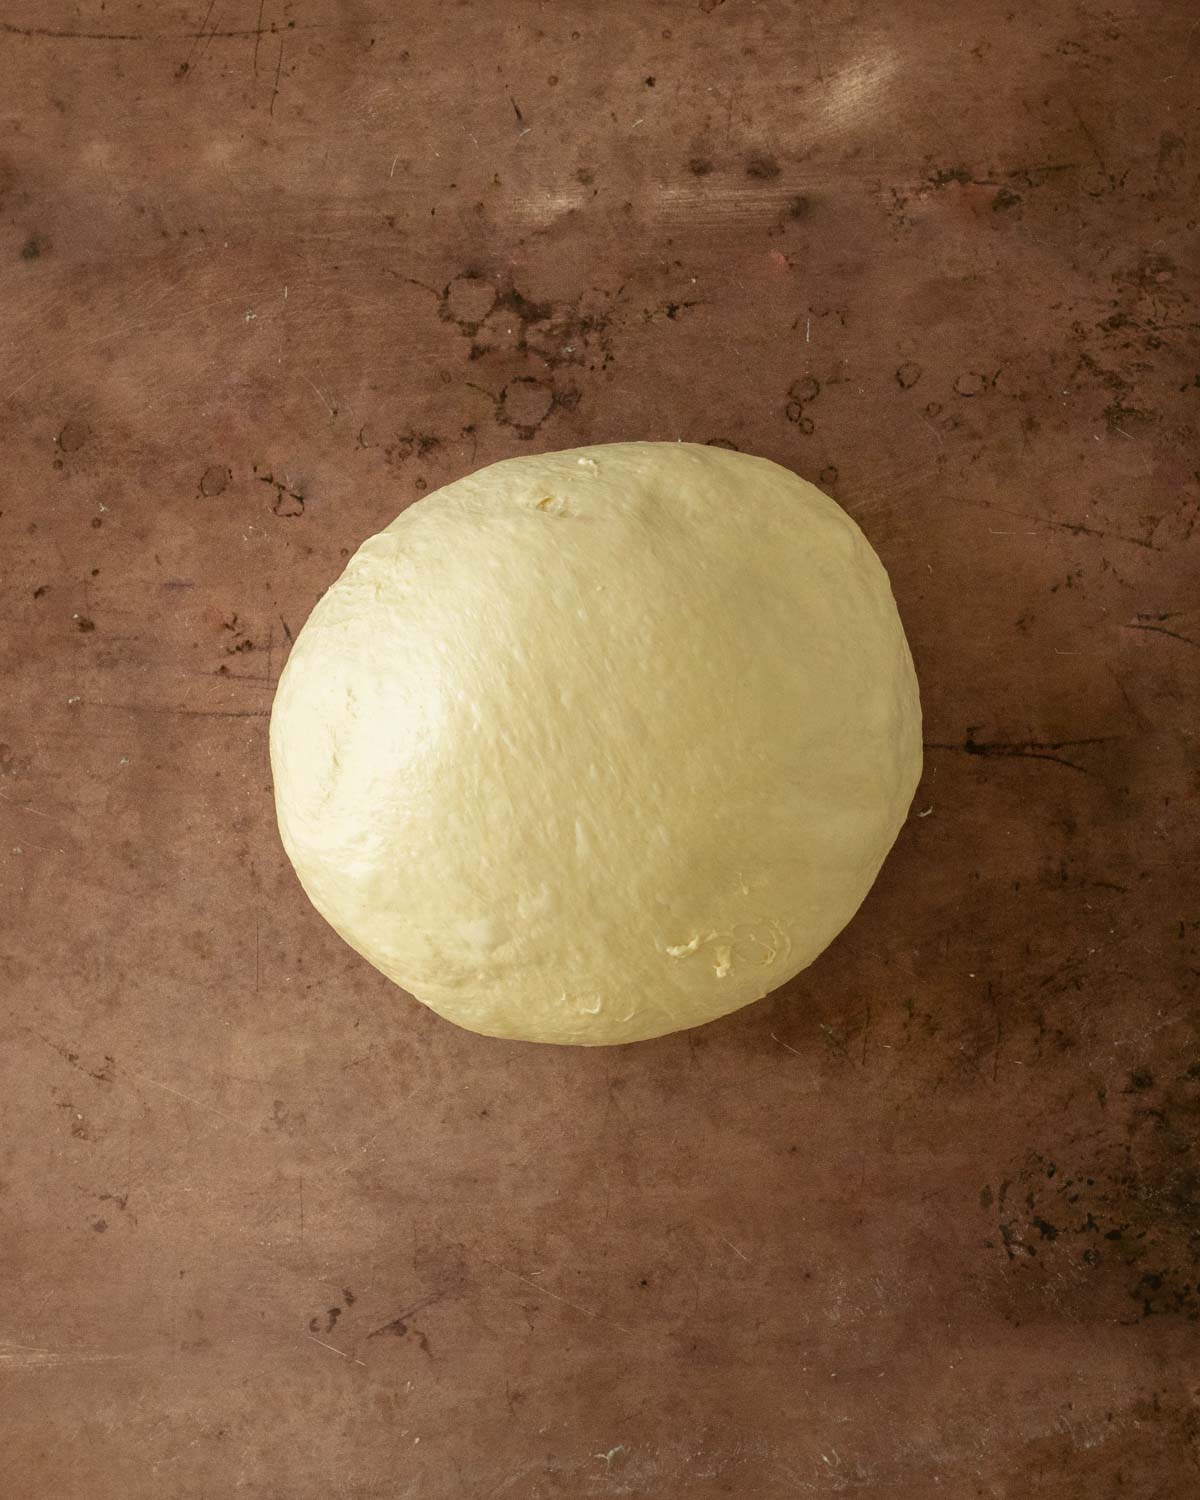 Step 15. Push the dough away then pull it back to form a ball. Rest 20 minutes then repeat the shaping process